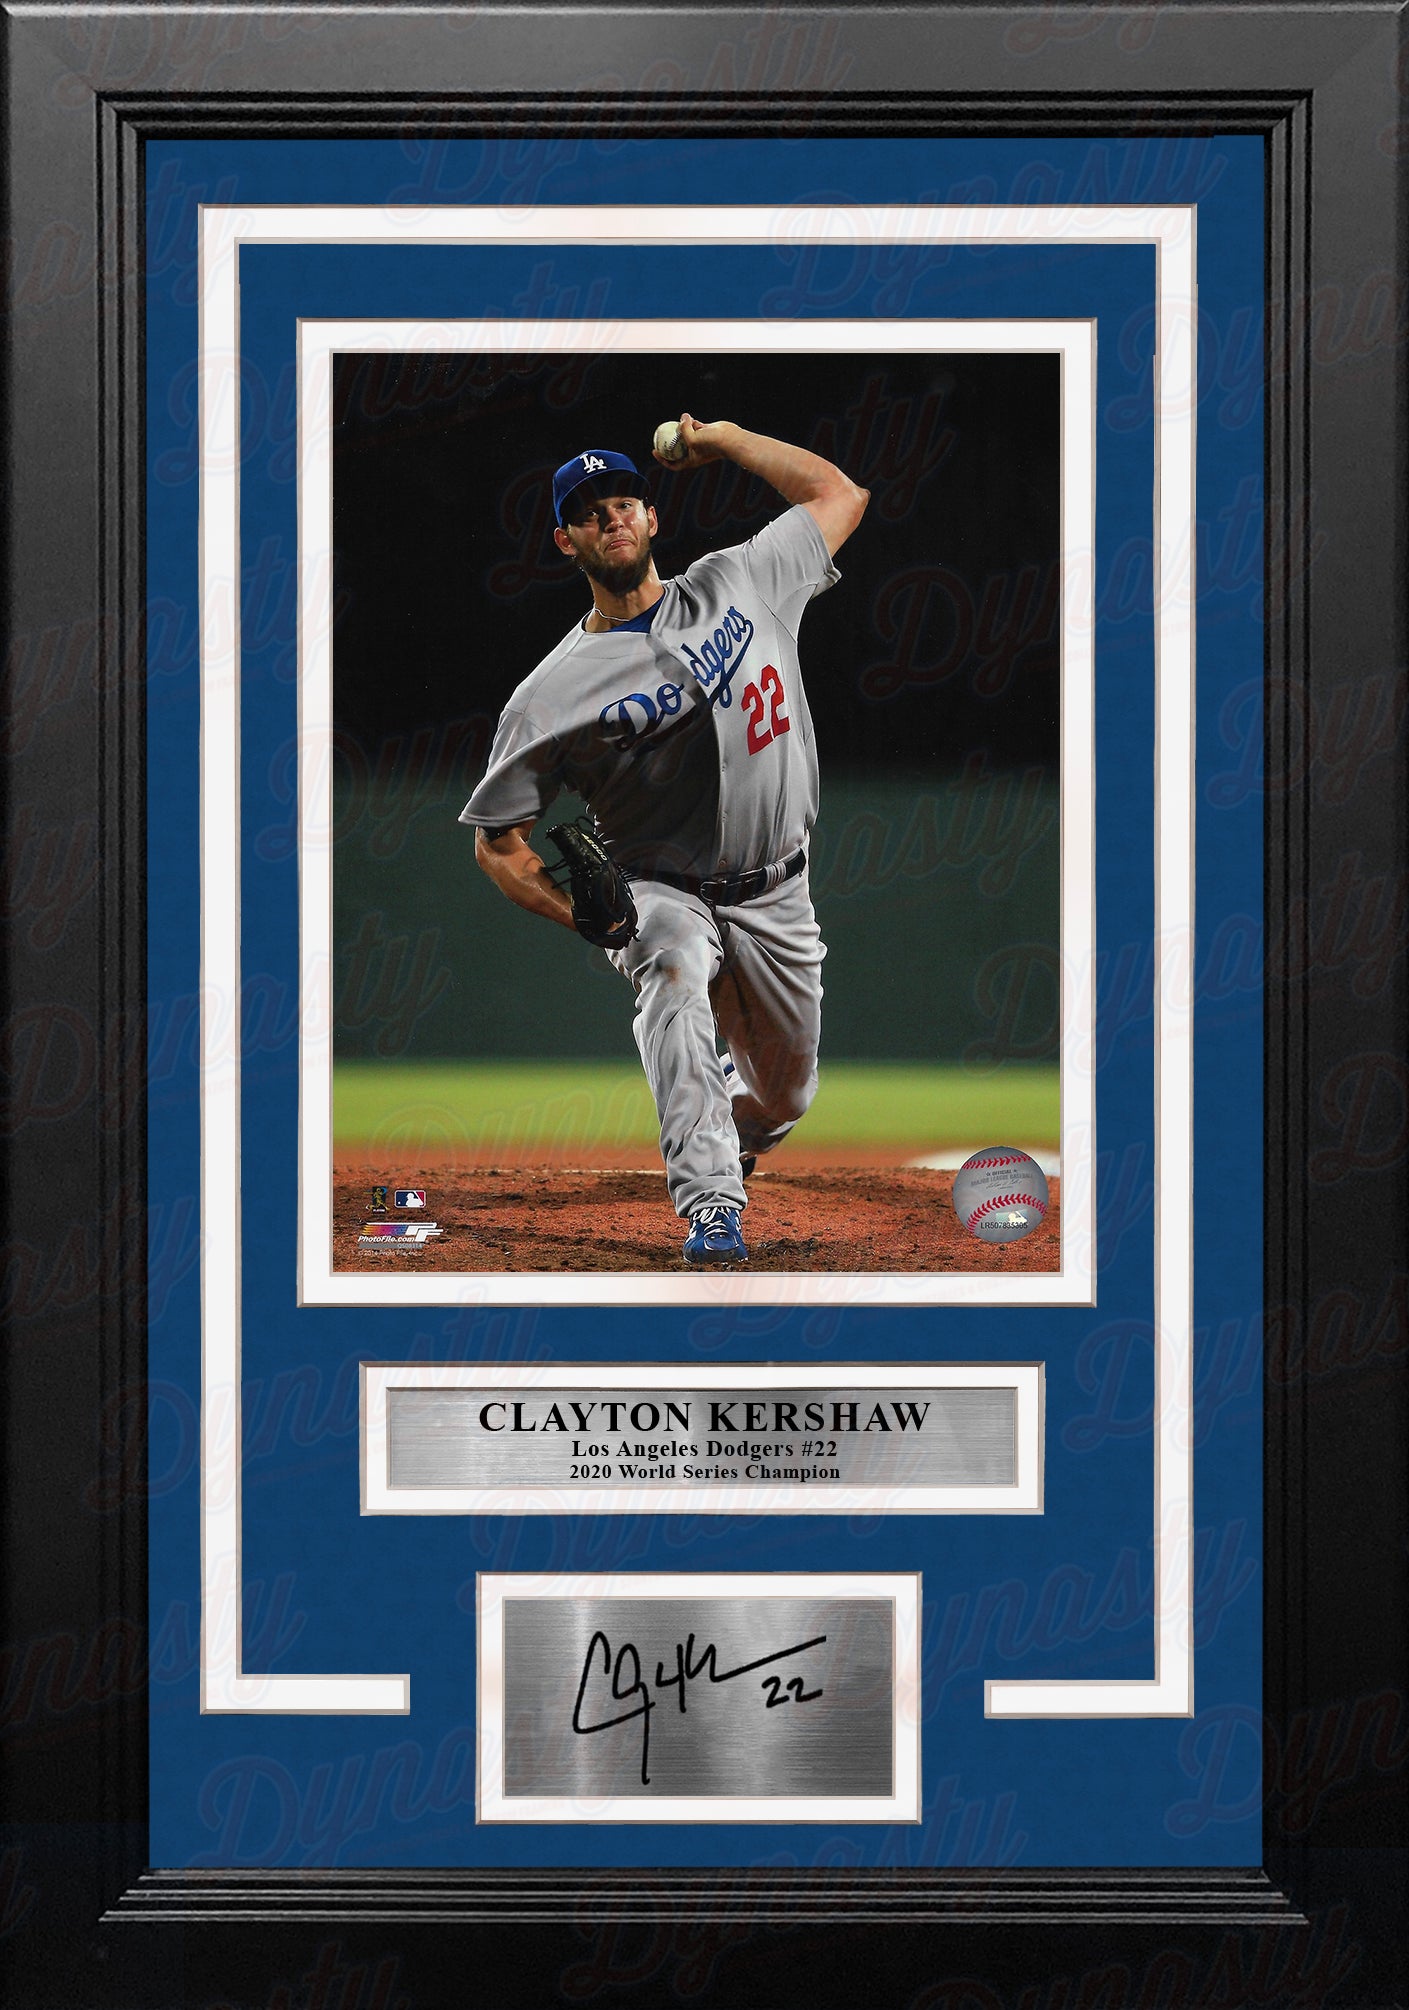 Clayton Kershaw in Action Los Angeles Dodgers 8 x 10 Framed Baseball  Photo with Engraved Autograph